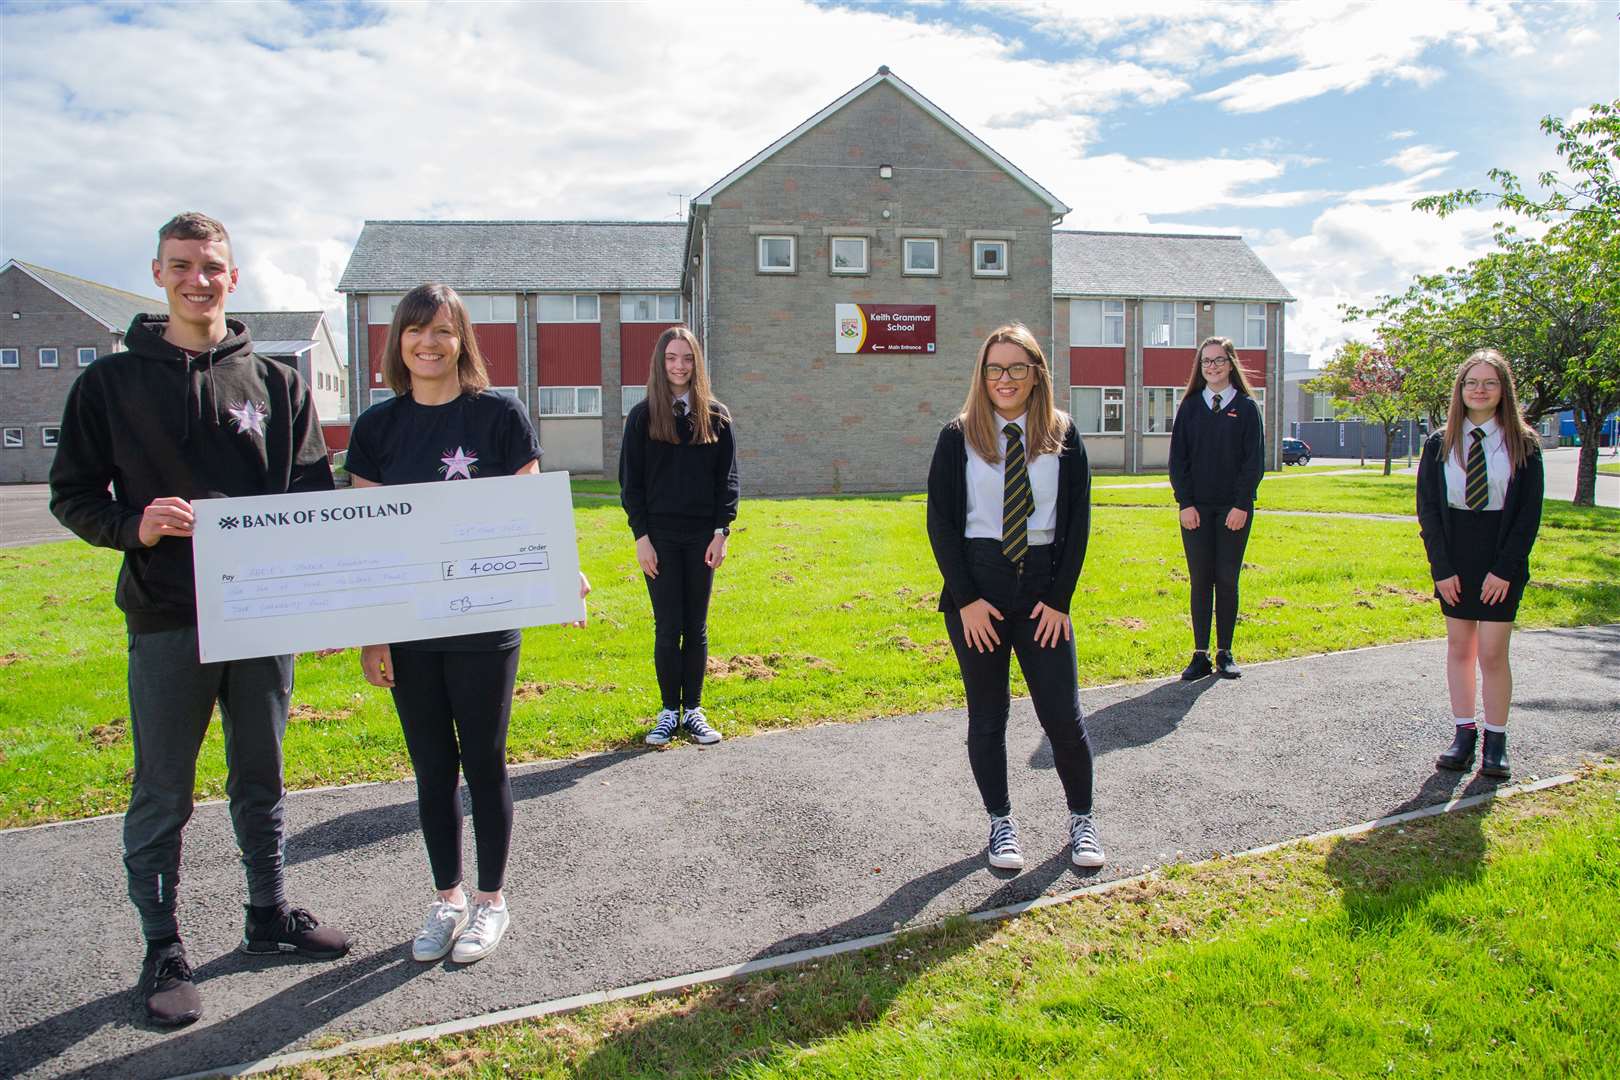 Cameron & Tammy Main accept a cheque for £4000 for the Abbie's Sparkle Foundation from Keith Grammar School pupils (left to right) Katie Dunbar, Megan Stewart, Cassie Findlay and Siobhan Donnison as part of the YPI excercise. ..Picture: Daniel Forsyth..